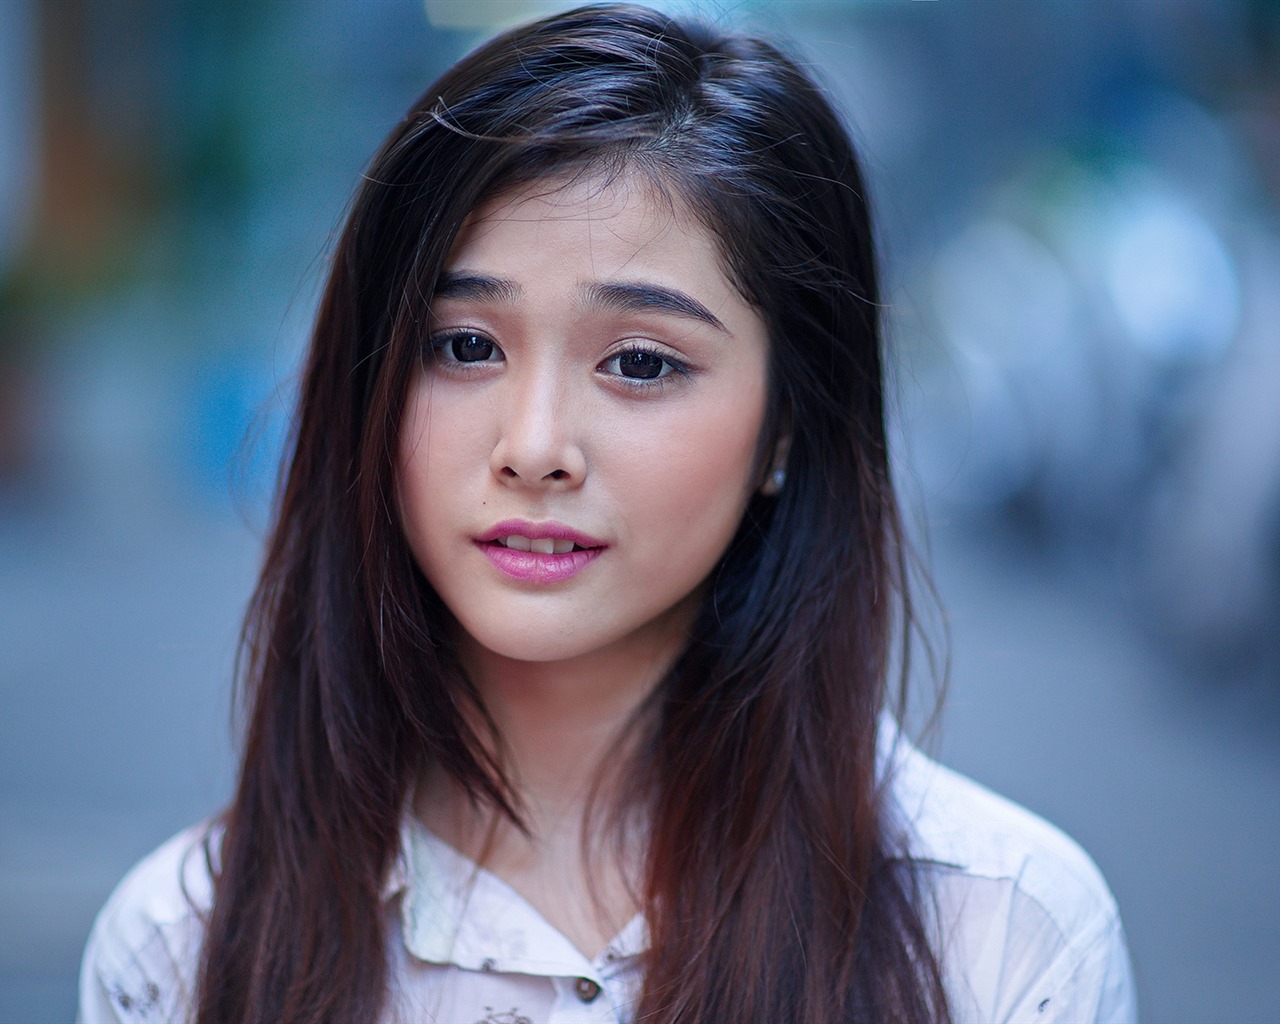 Pure and lovely young Asian girl HD wallpapers collection (1) #31 - 1280x1024